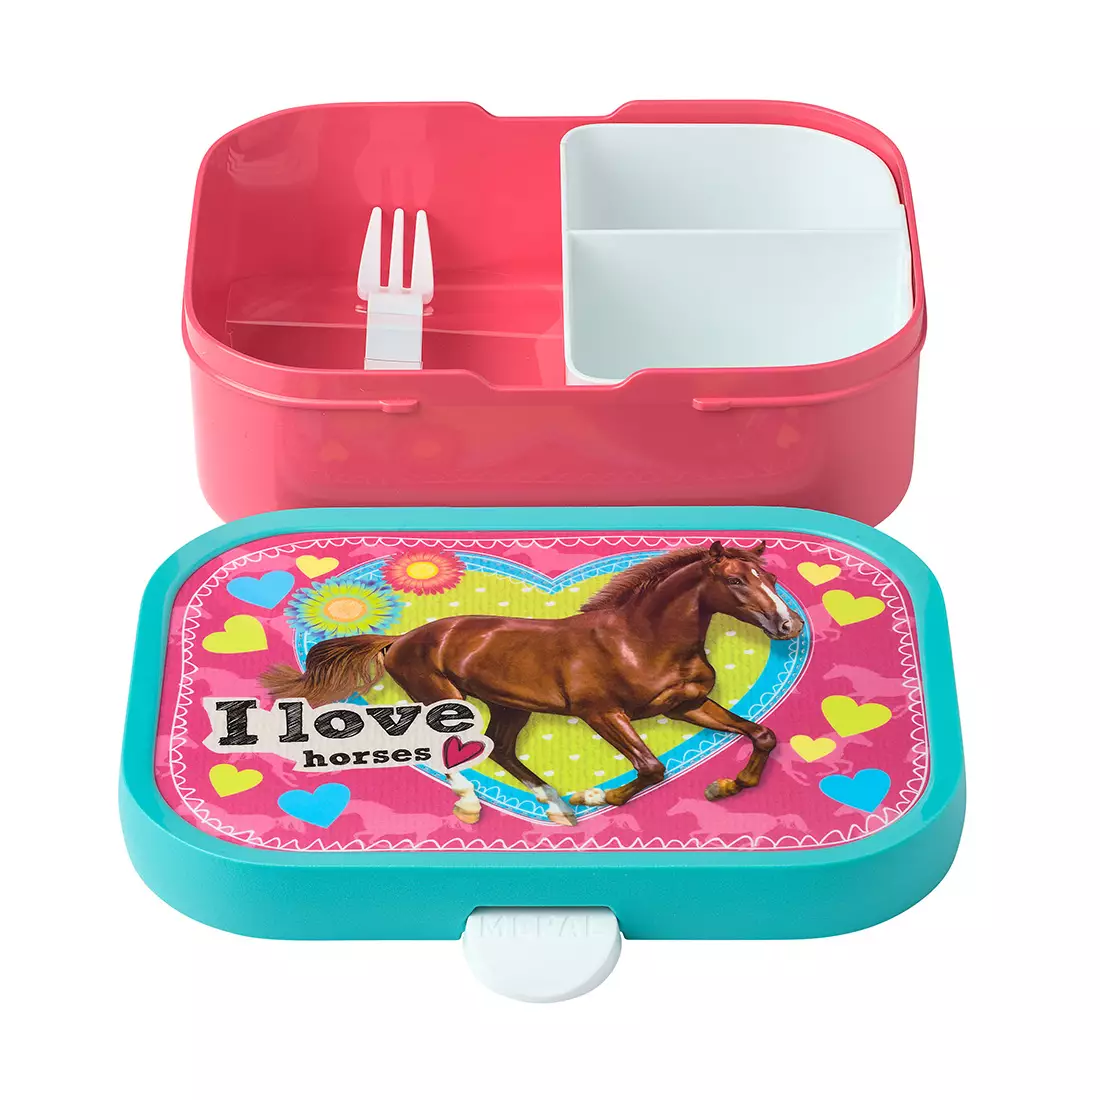 Mepal Campus My horse children's lunchbox, pink-turquoise